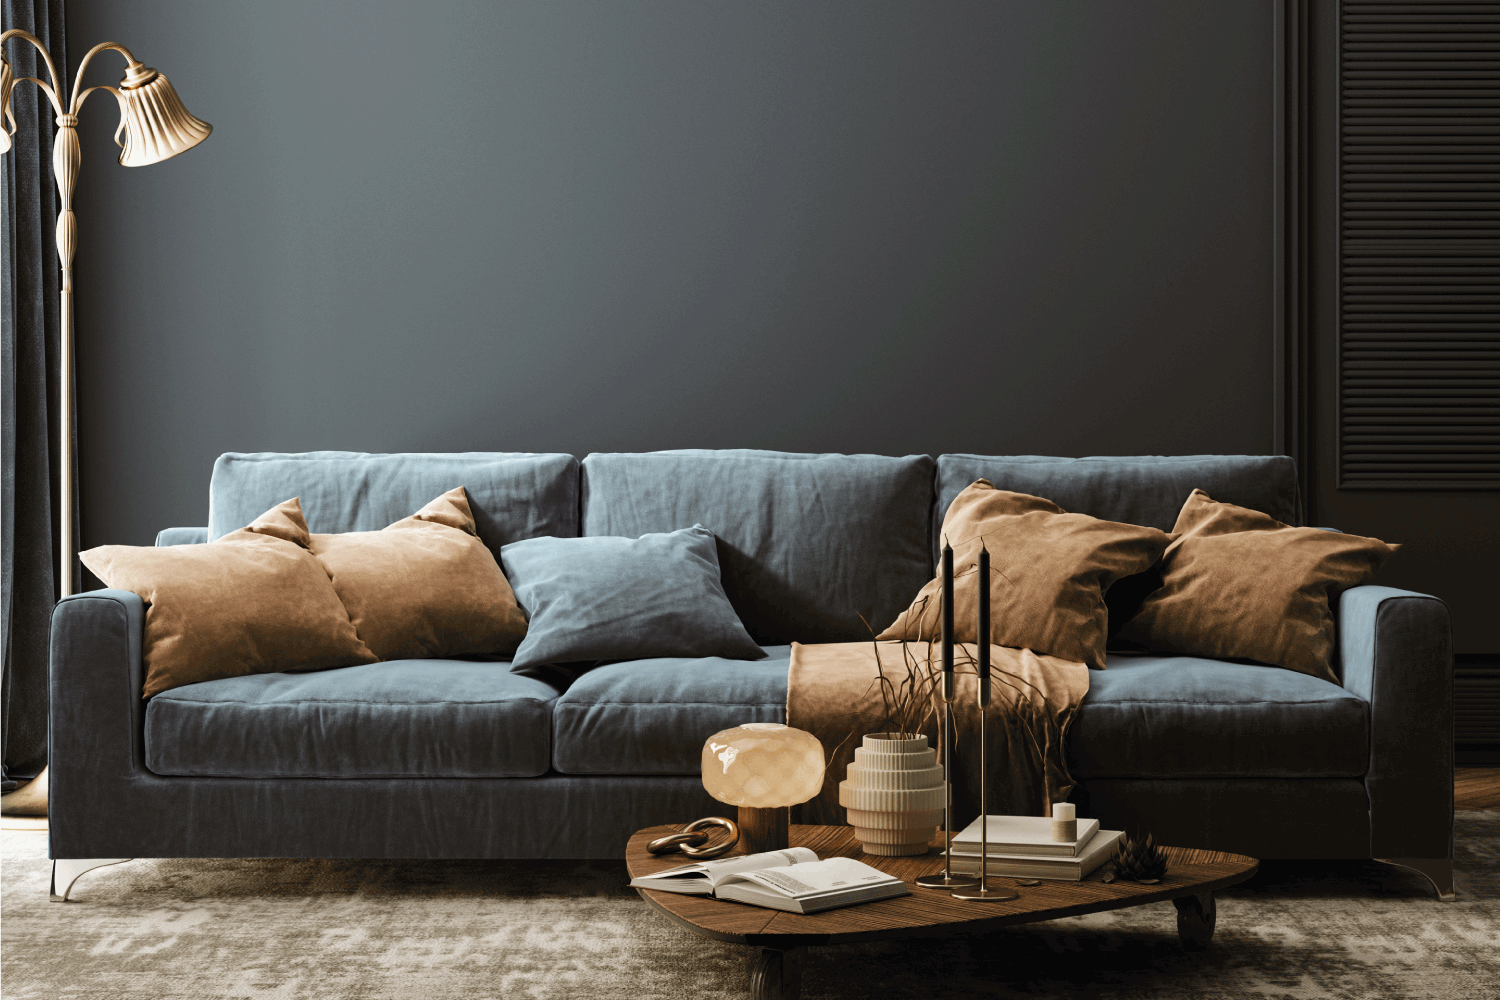 Modern home interior with dark blue sofa, table and decor in living room